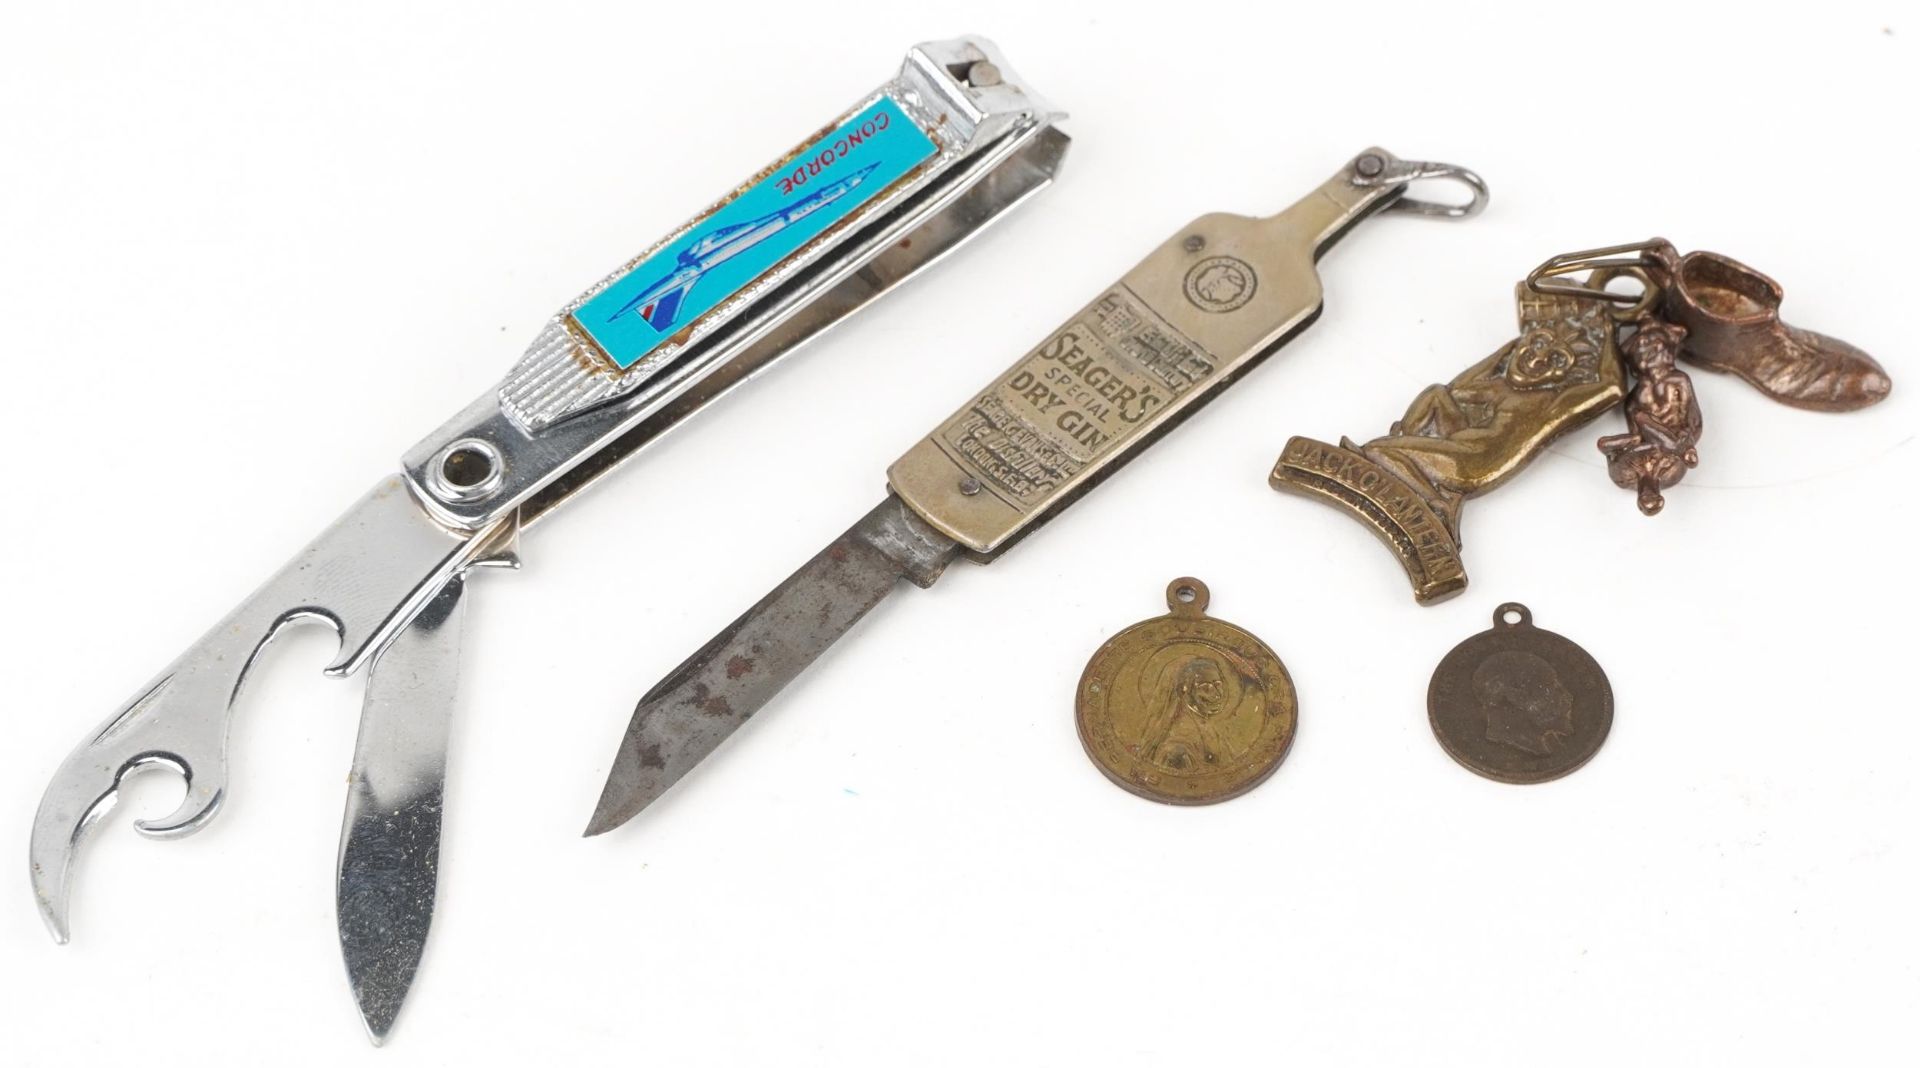 Sundry items including an aviation interest nail clippers advertising Concorde and a folding